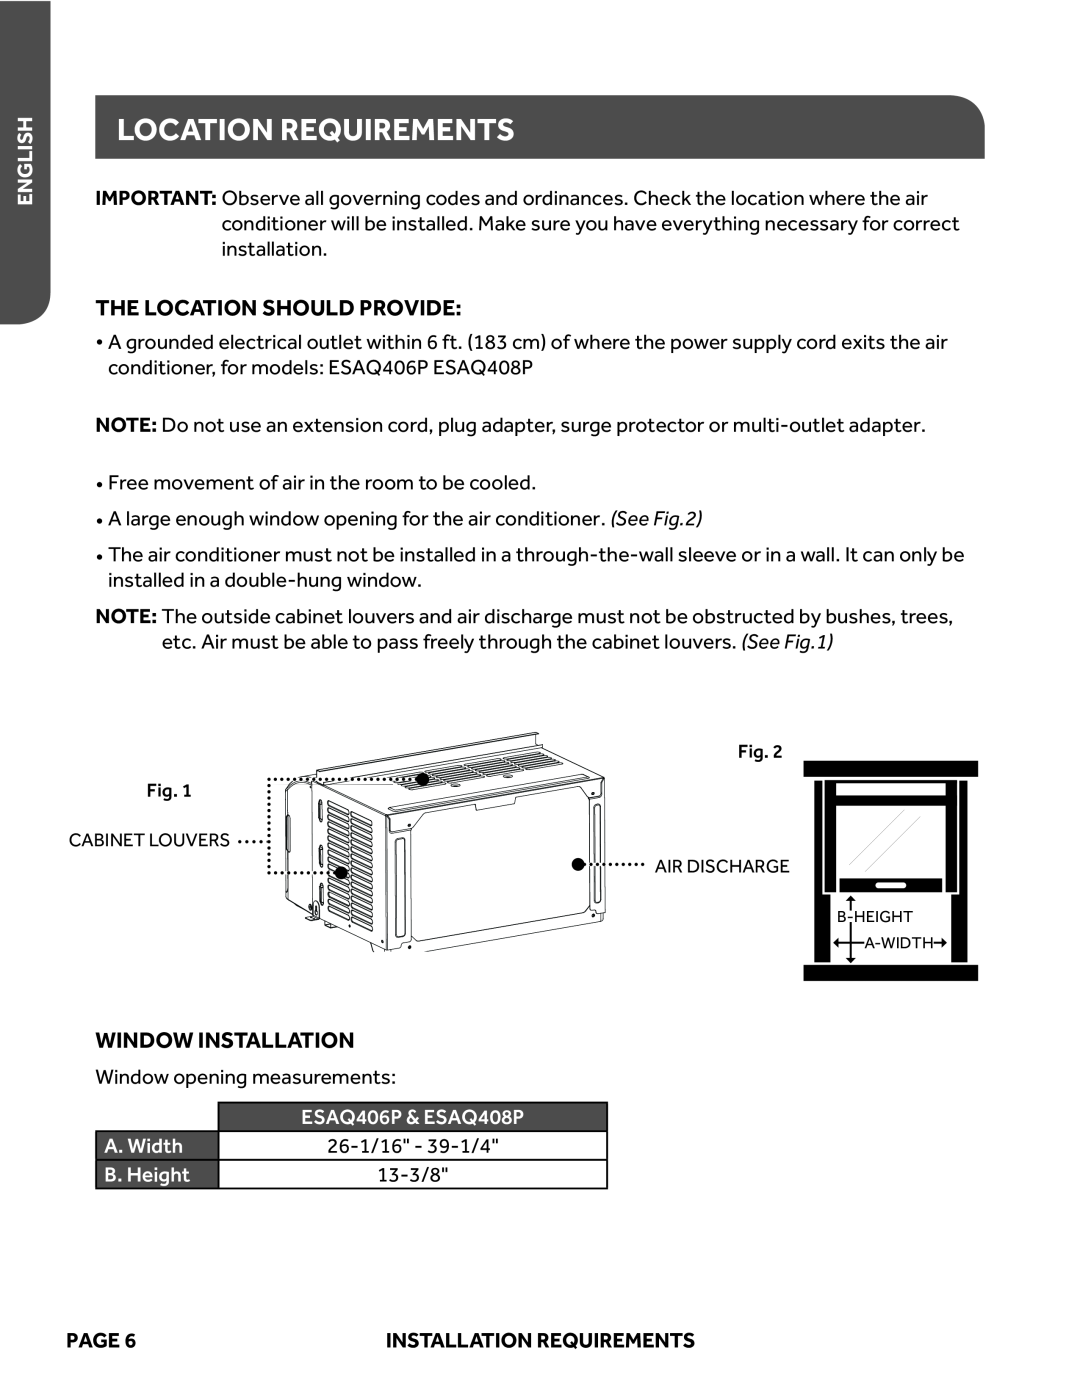 Haier ESAQ408P, ESAQ406P user manual Location Requirements, The Location Should Provide, Window Installation, English, Page 